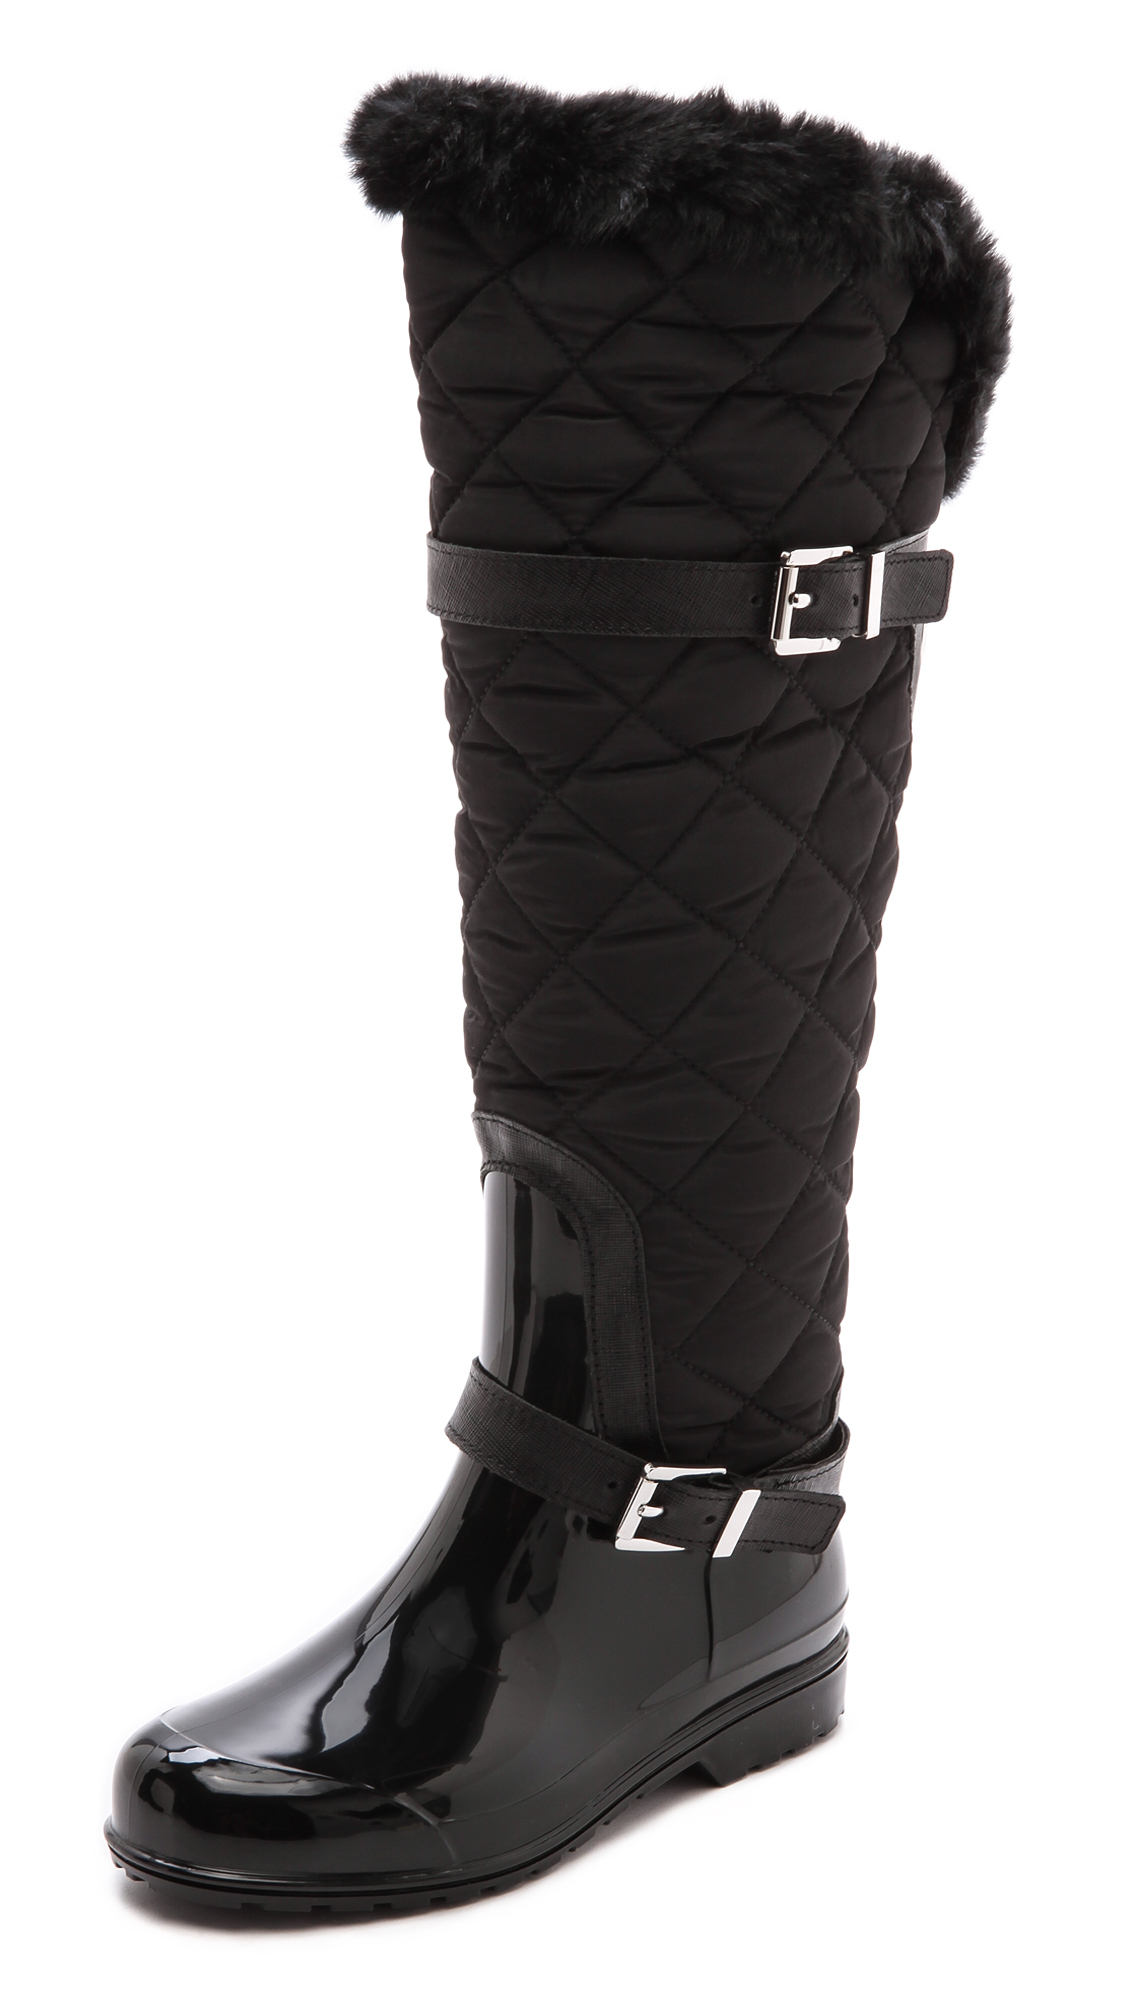 Lyst - MICHAEL Michael Kors Fulton Quilted Rain Boots - Black in Black